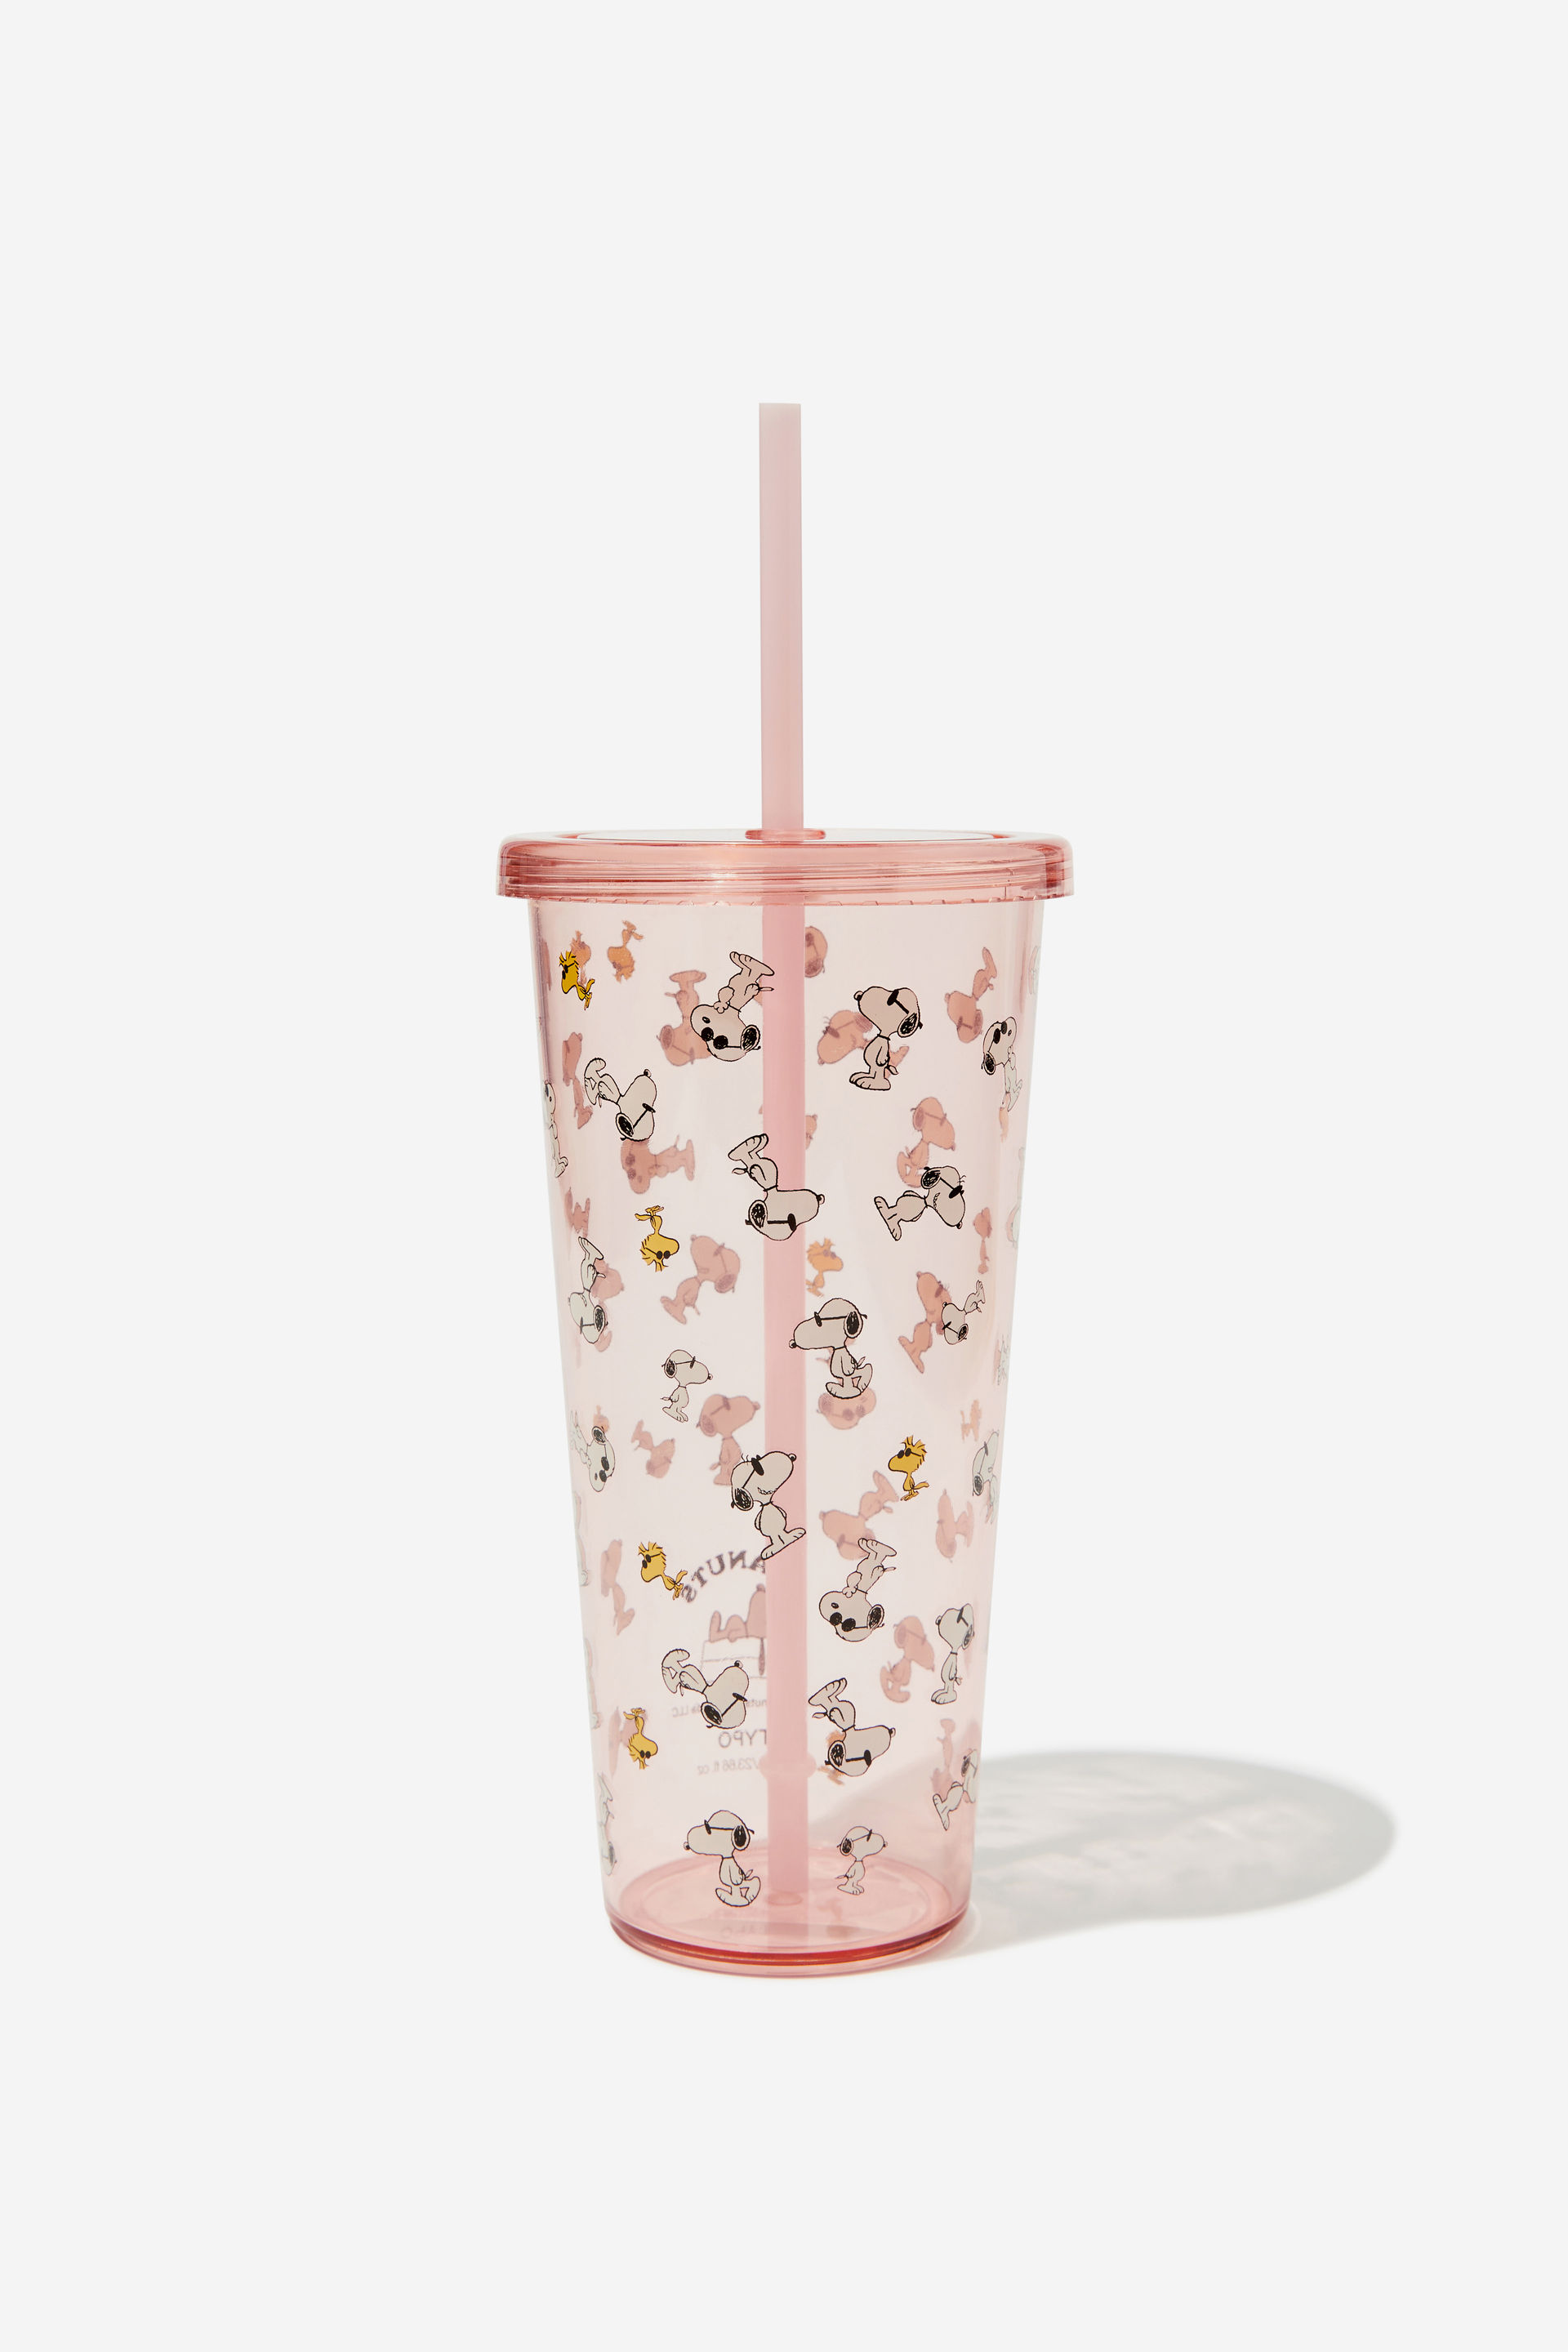 Typo - Snoopy Sipper Smoothie Cup - Lcn pea snoopy ydg pink